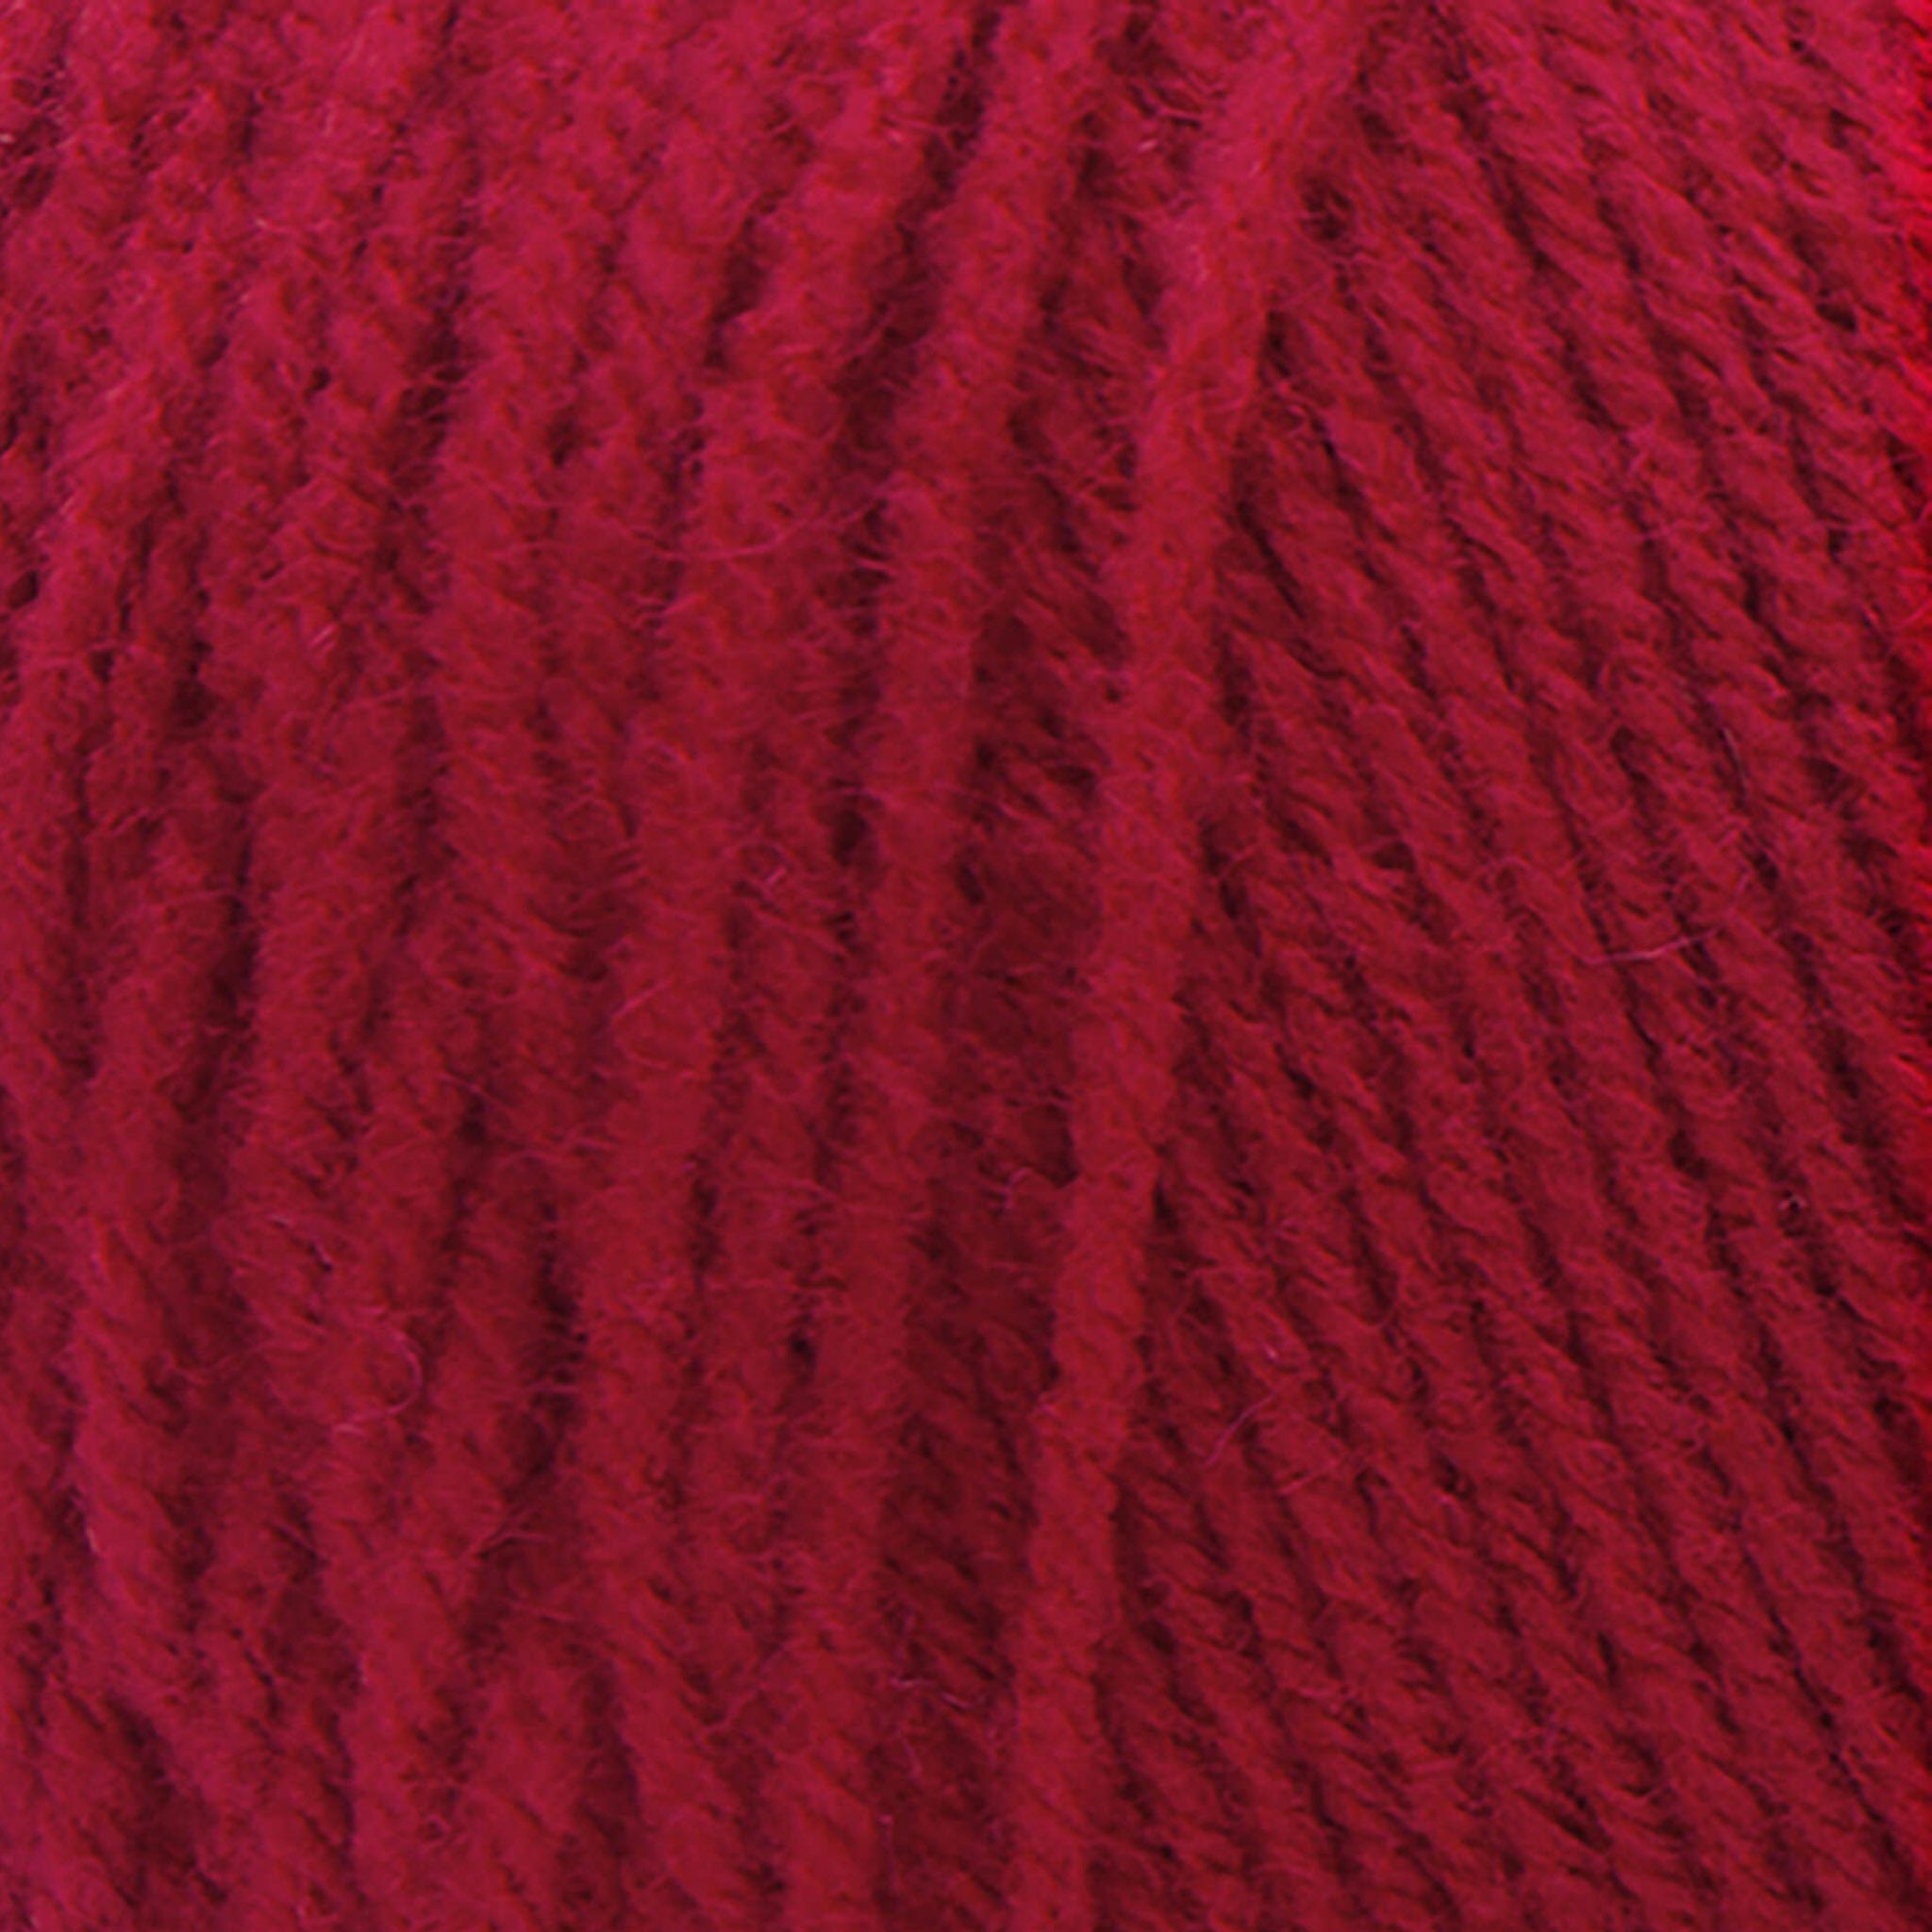 Cherry Red Red Heart Super Saver Swatch